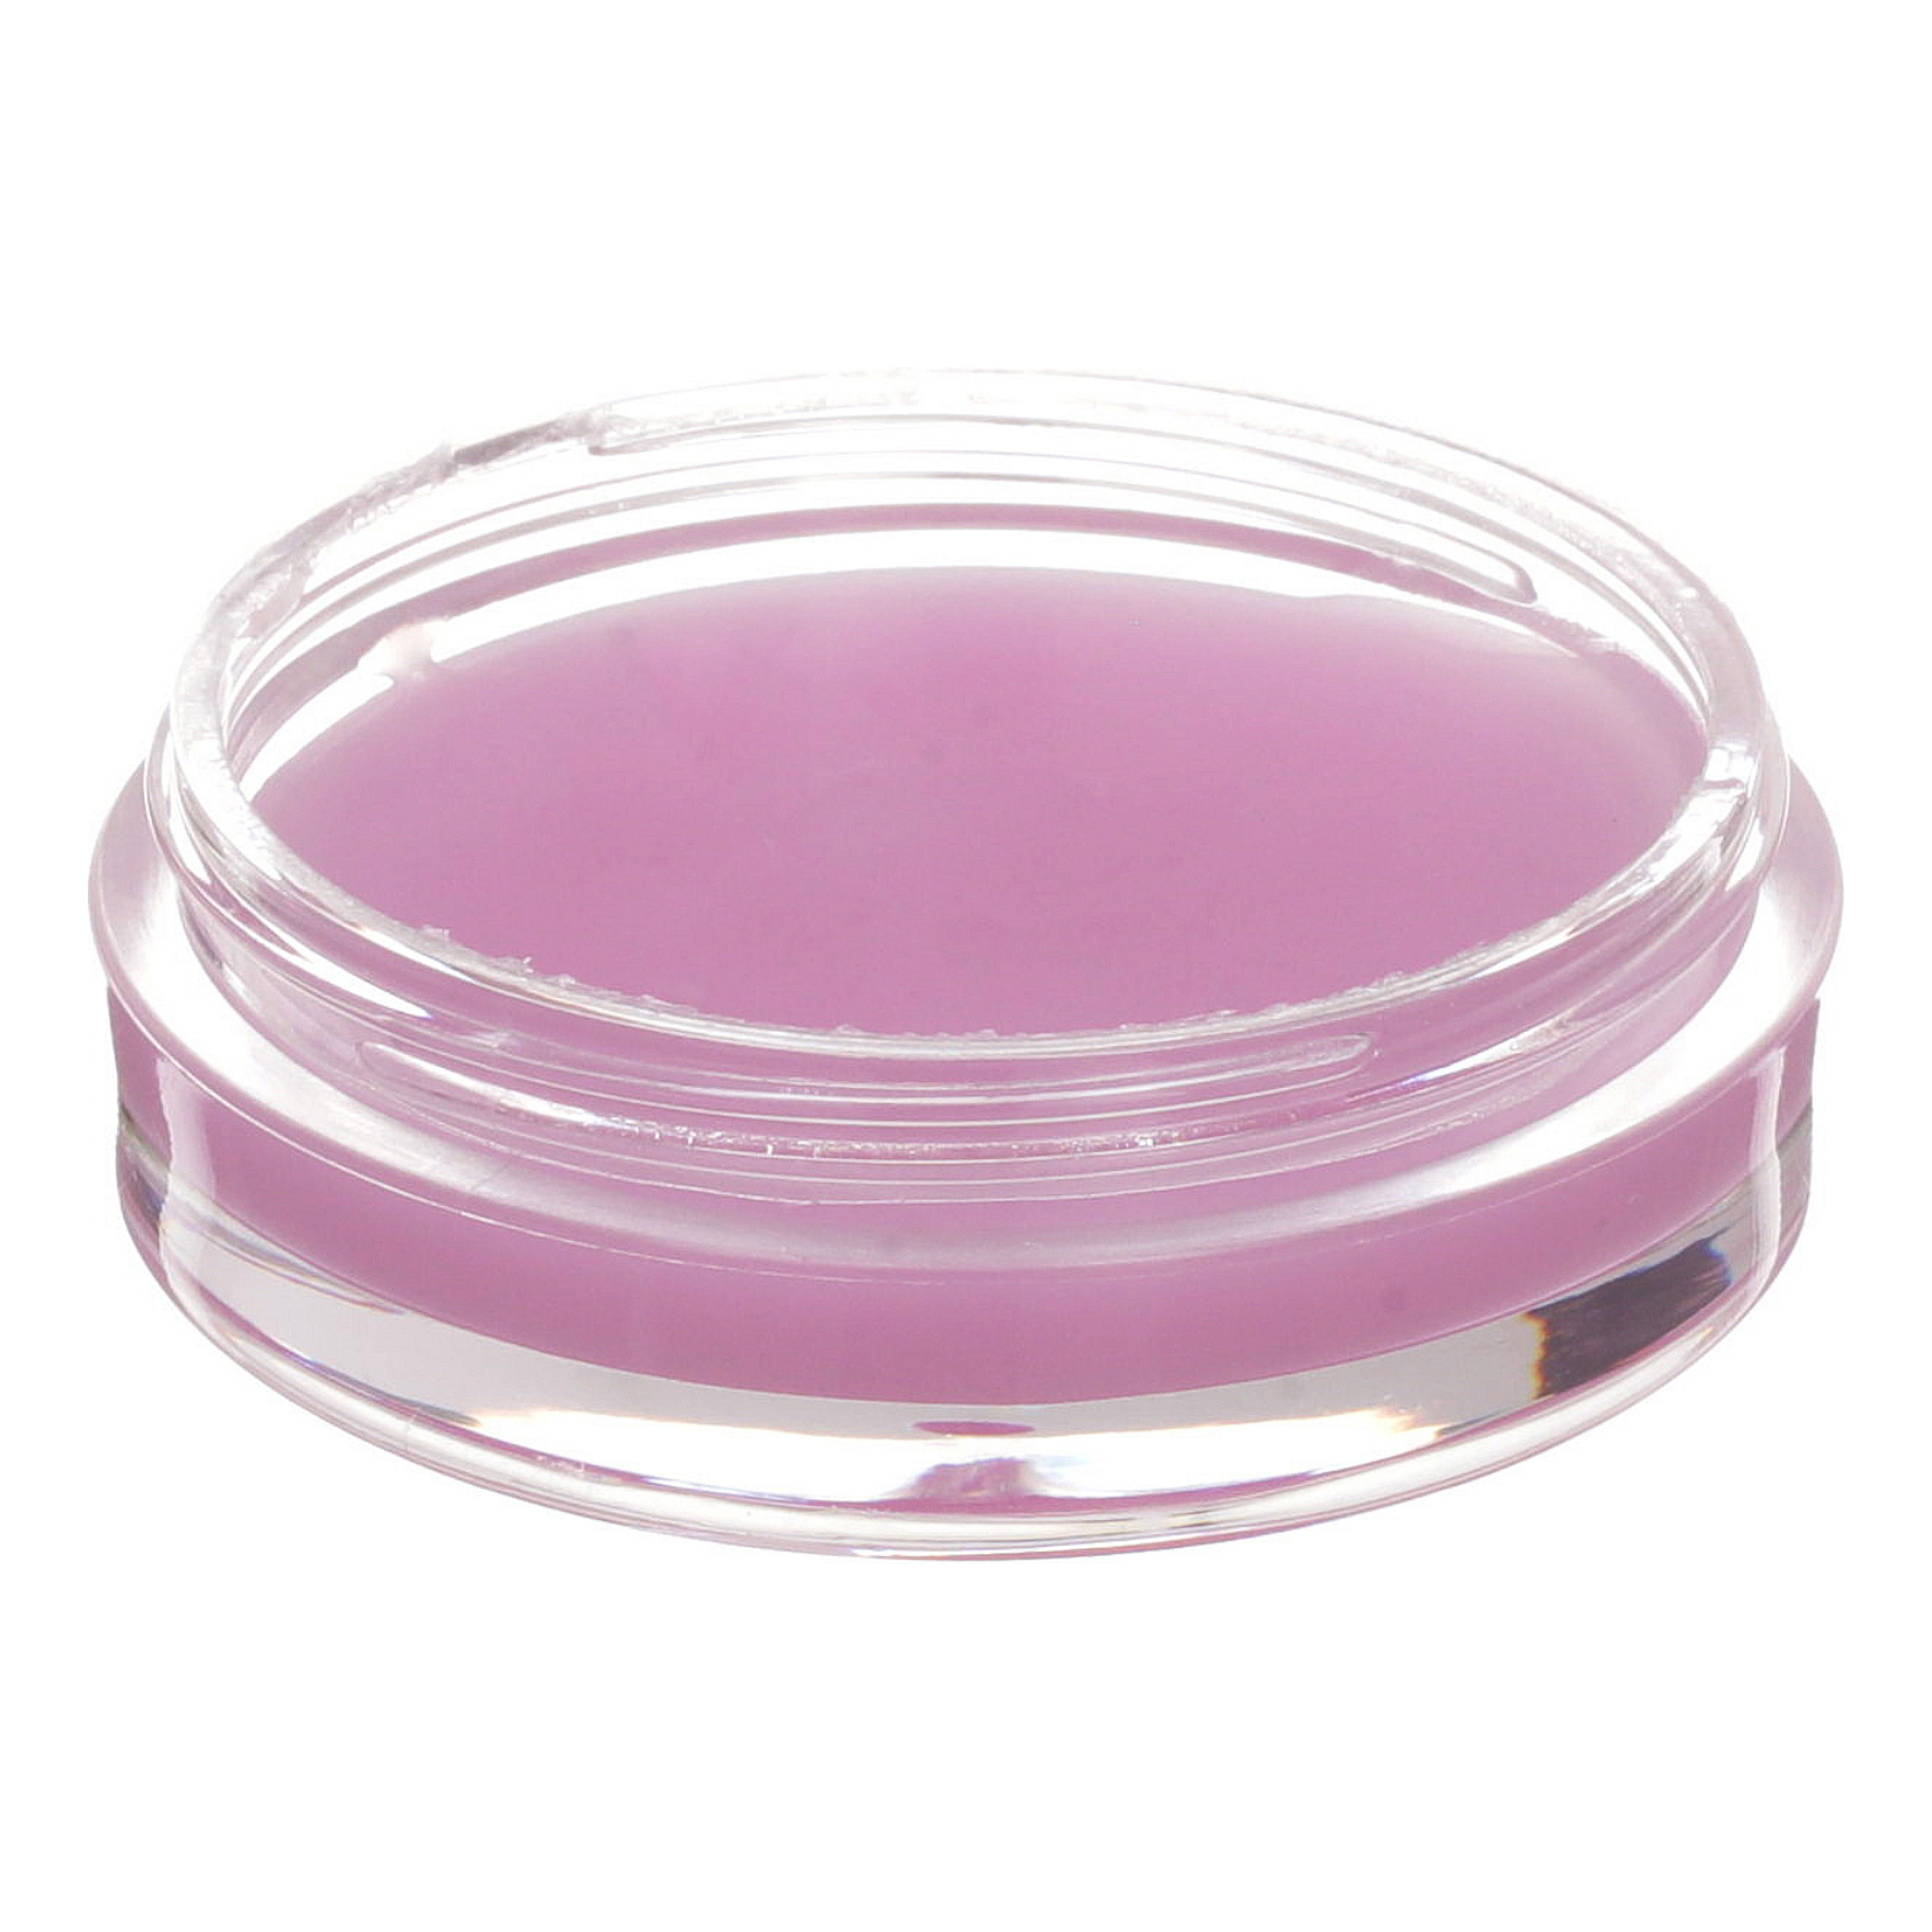 wet n wild Perfect Pout Sleeping Lip Mask, Lavender - image 4 of 8